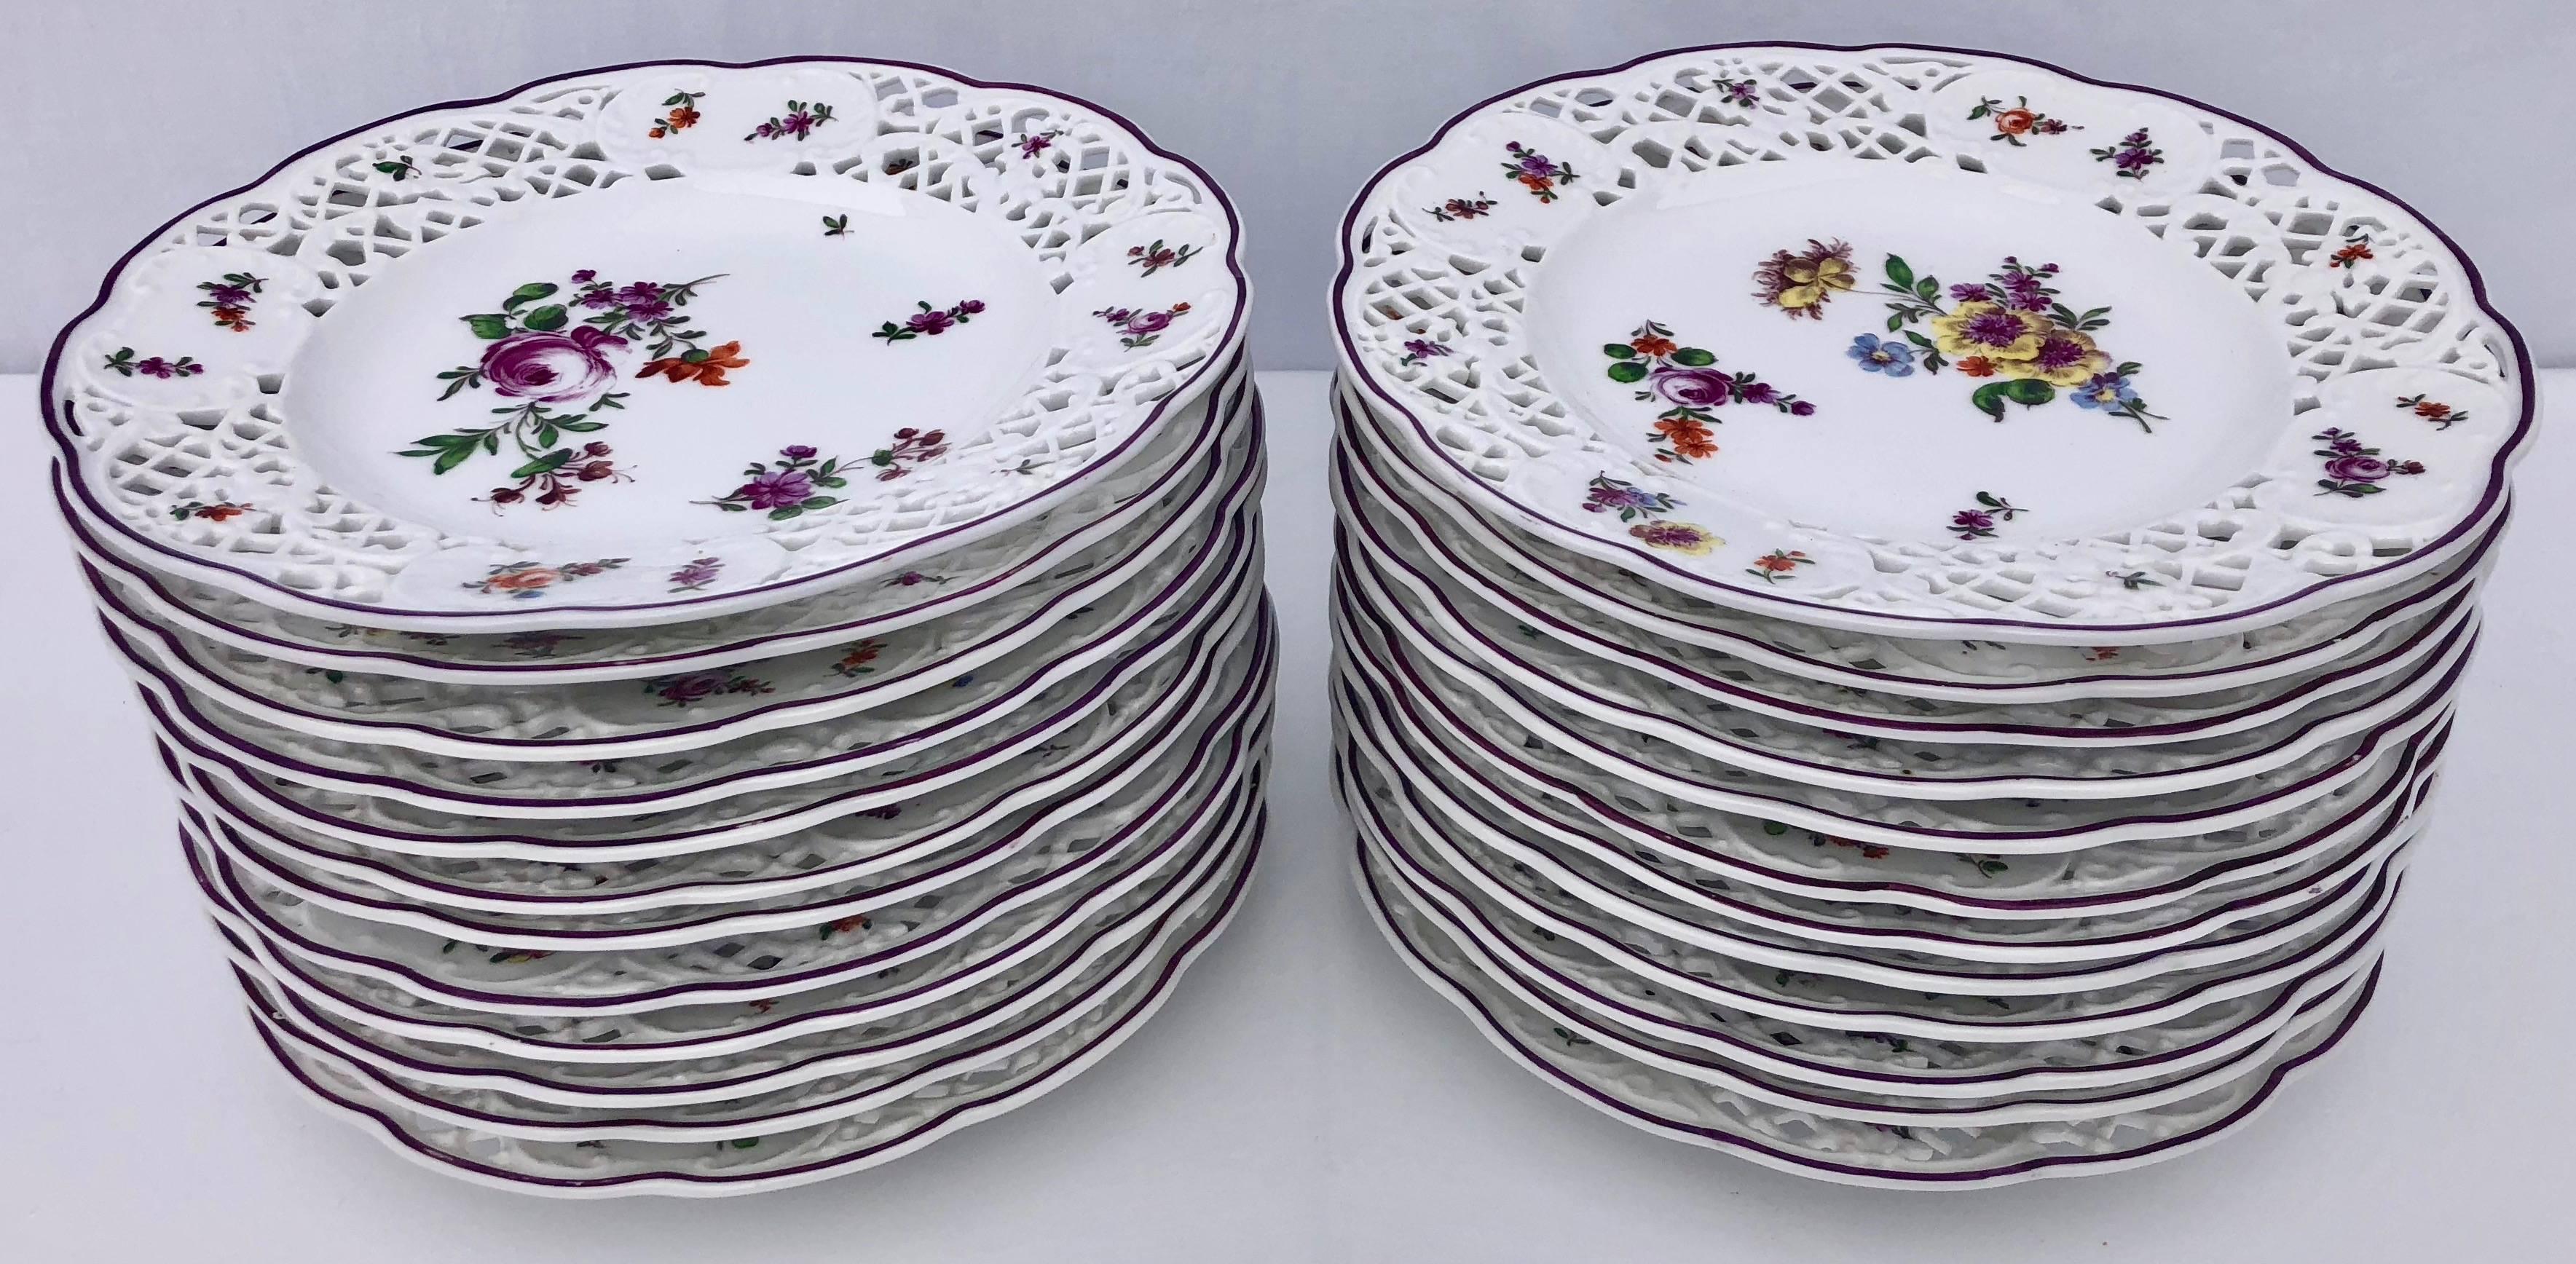 24 Meissen Plates with Reticulated Borders and Floral Decoration, Early 1900s (20. Jahrhundert) im Angebot